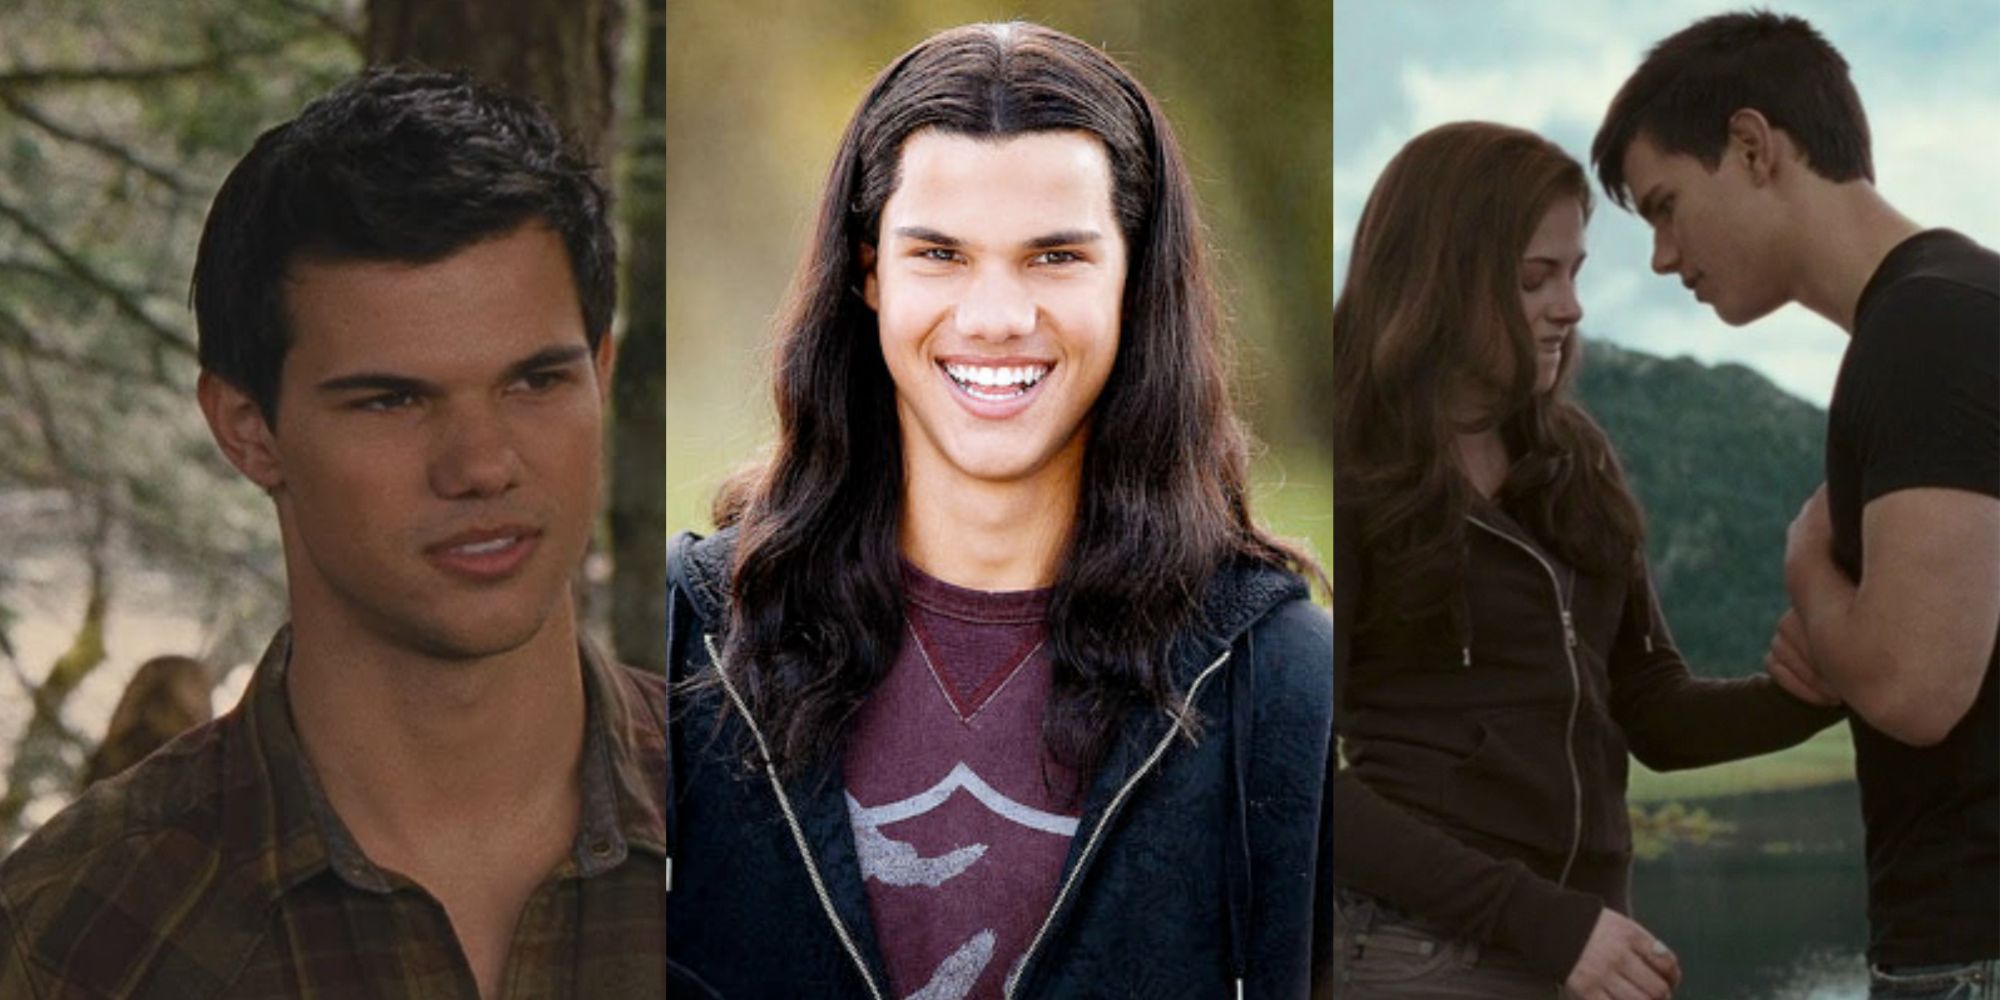 Split image of Jacob Black looking at Renesmee, smiling with long hair, and making Bella put her hand on his chest